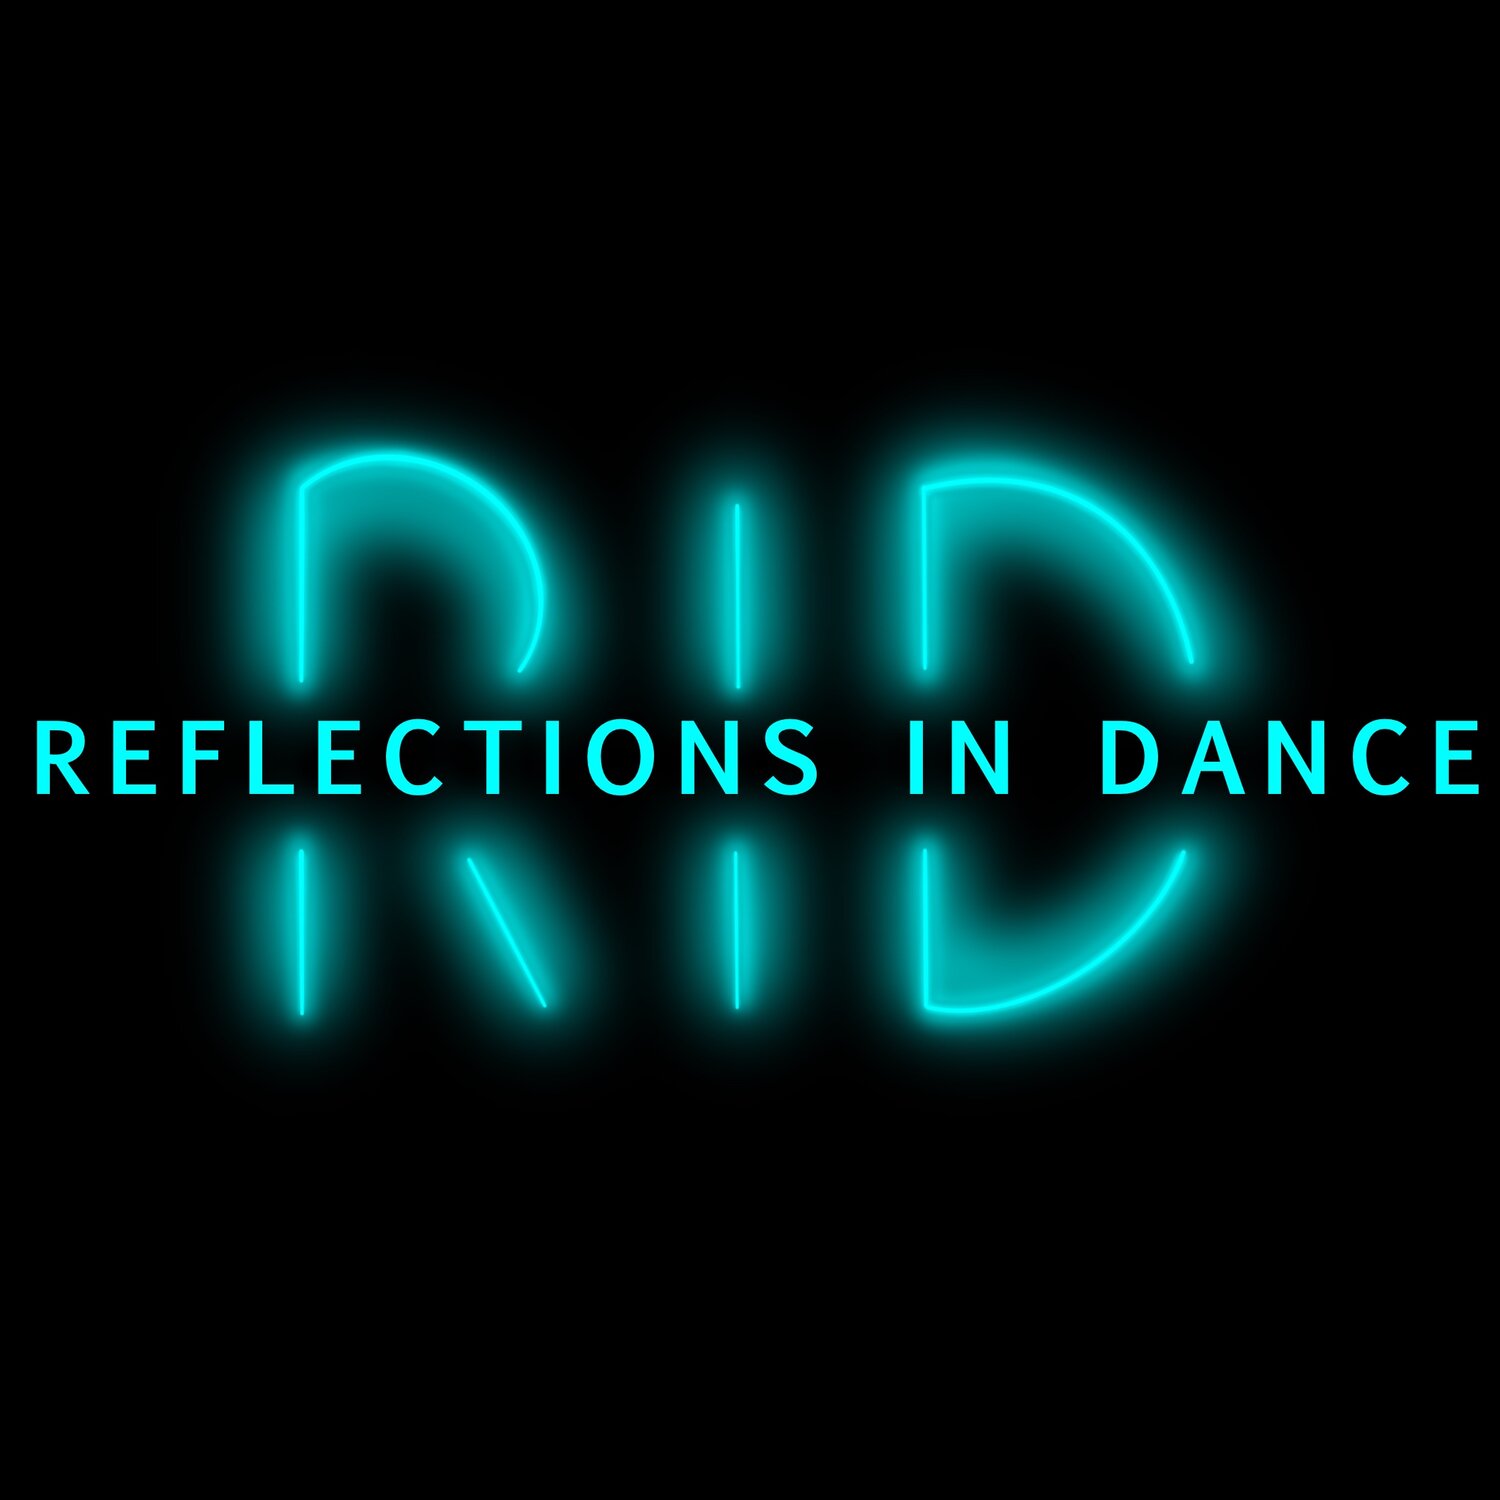 Reflections in Dance